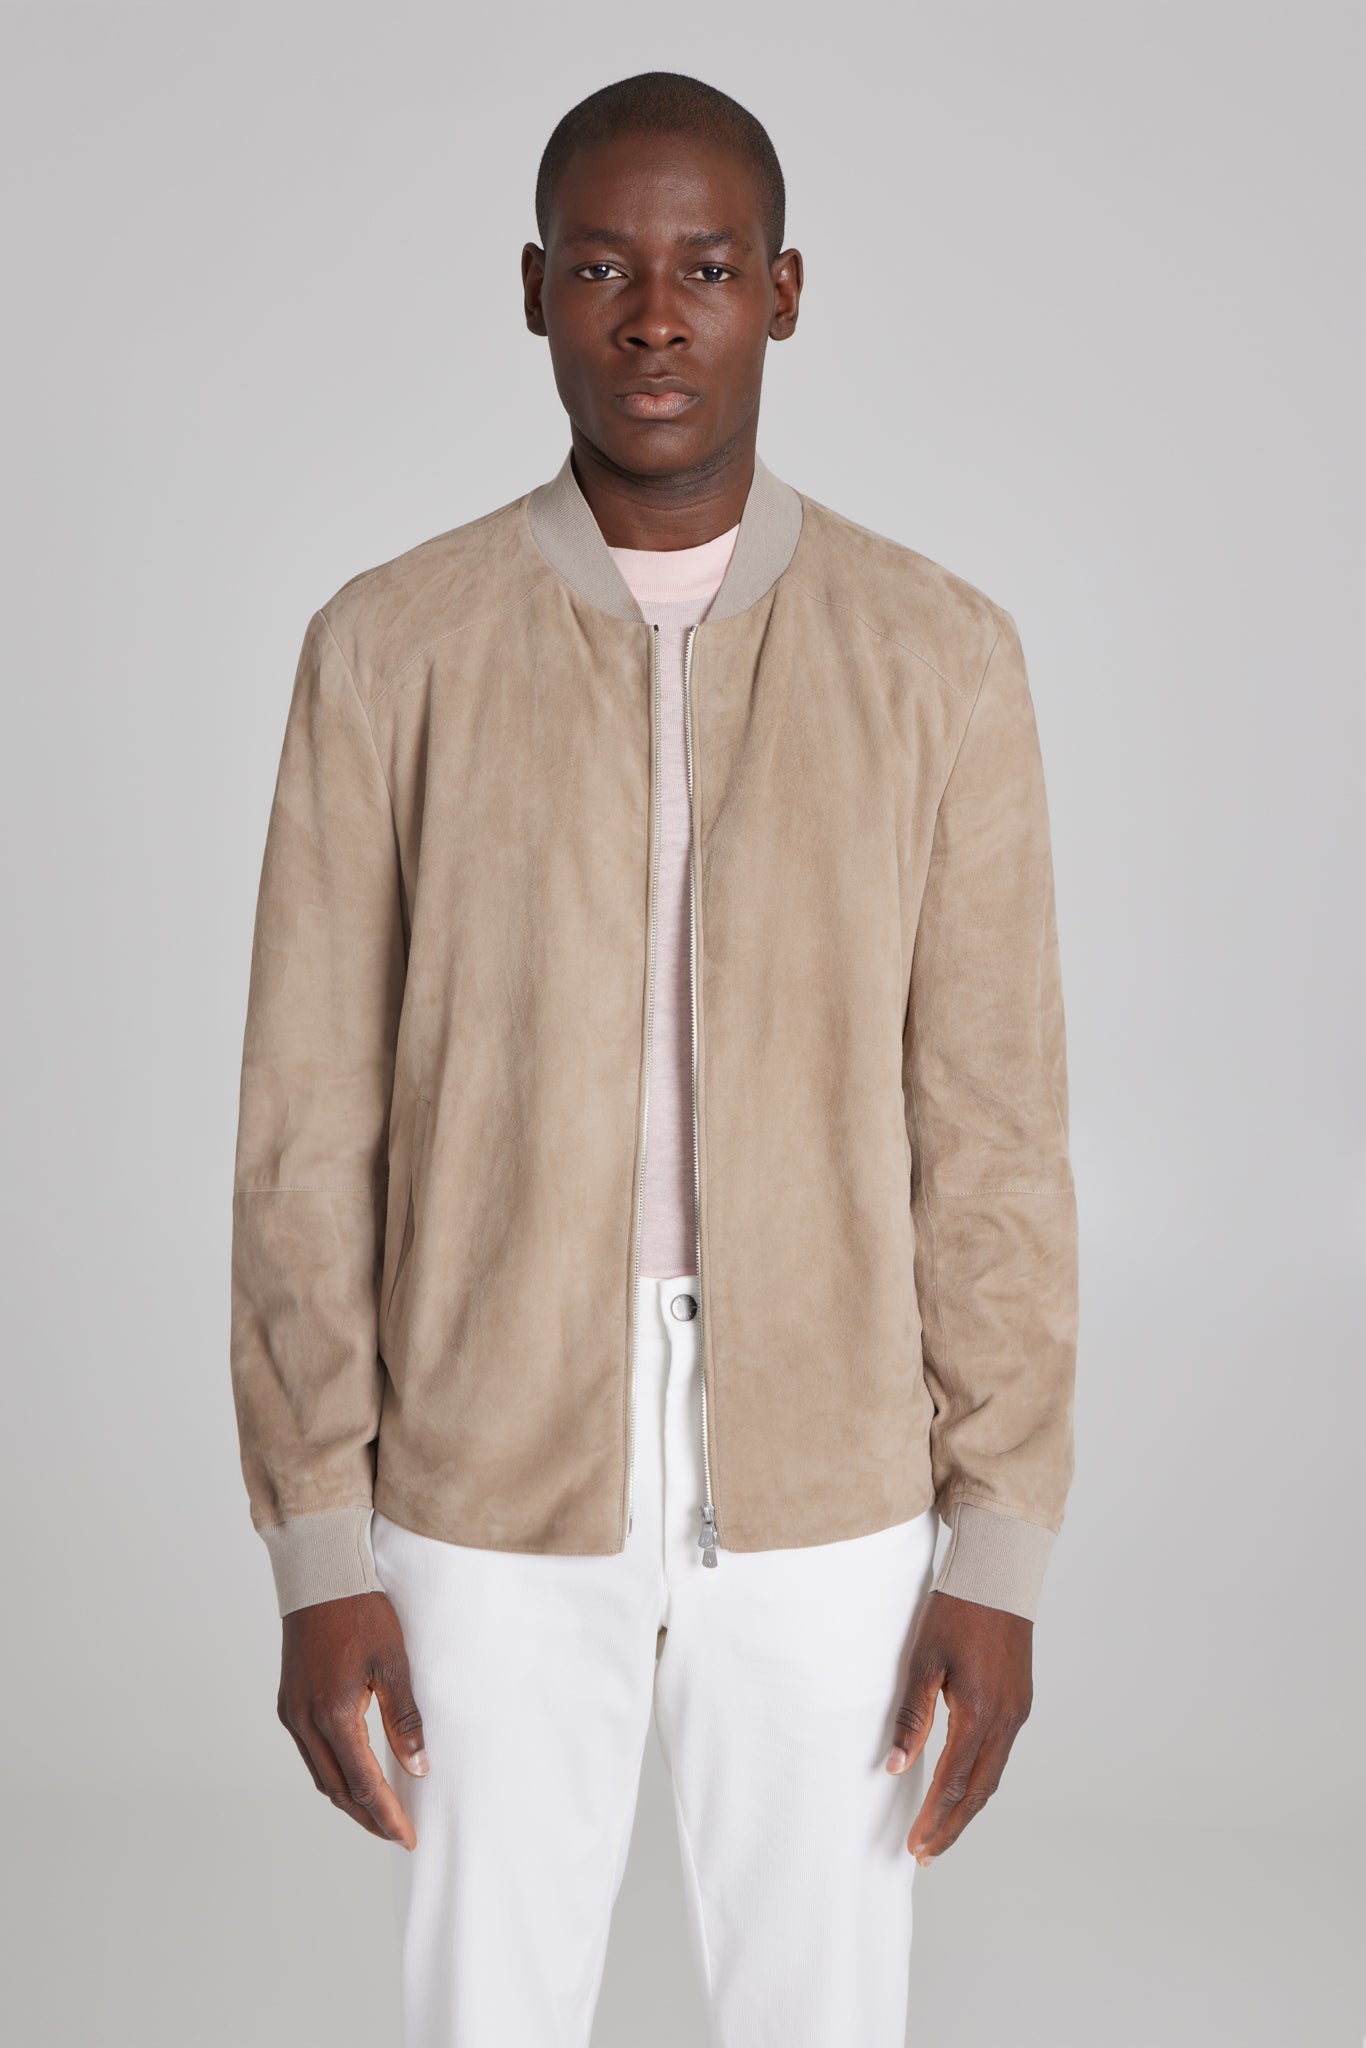 Alt view Barclay Suede Bomber Jacket in Tan